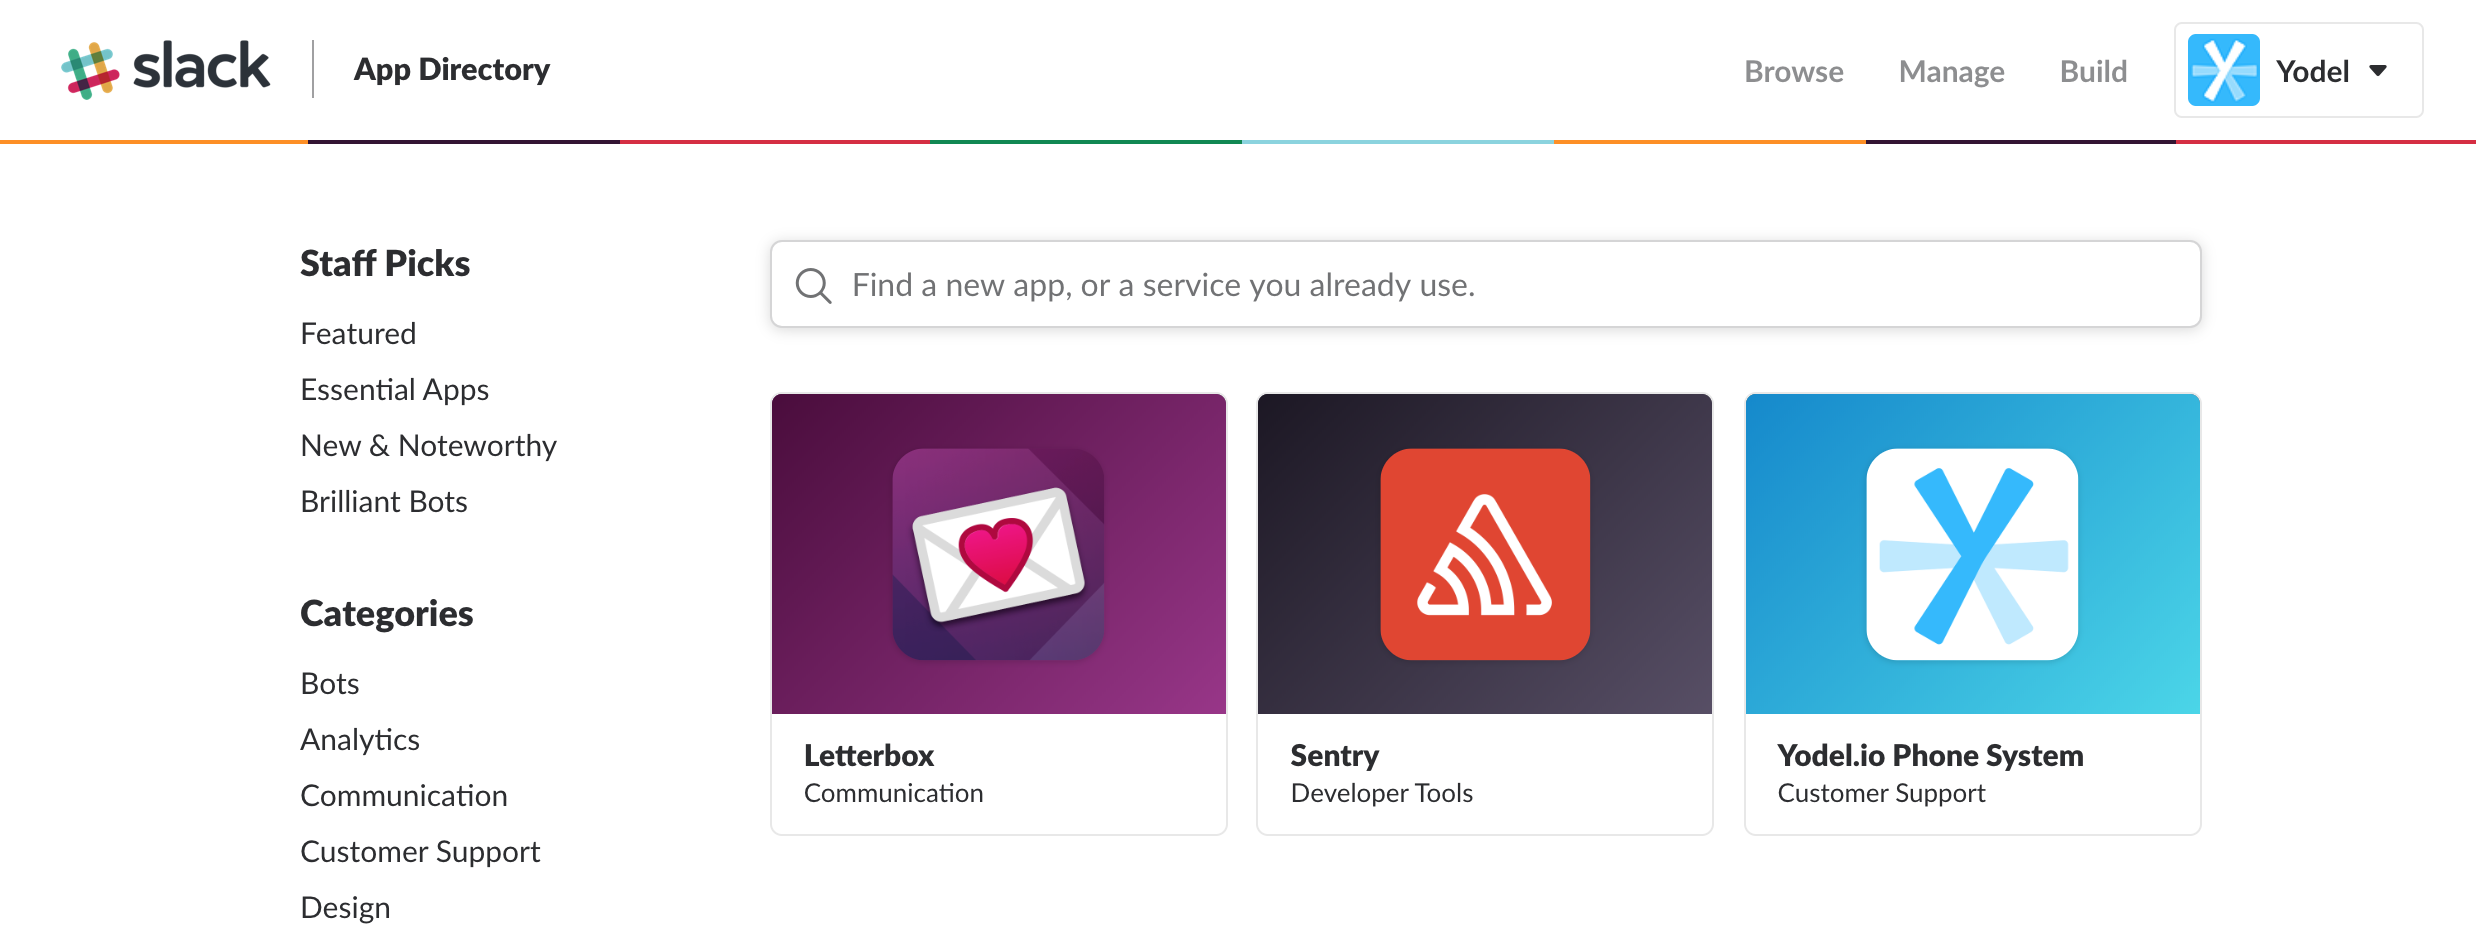 Yodel.io listed on the Slack App Directory as a recommended app from their staff